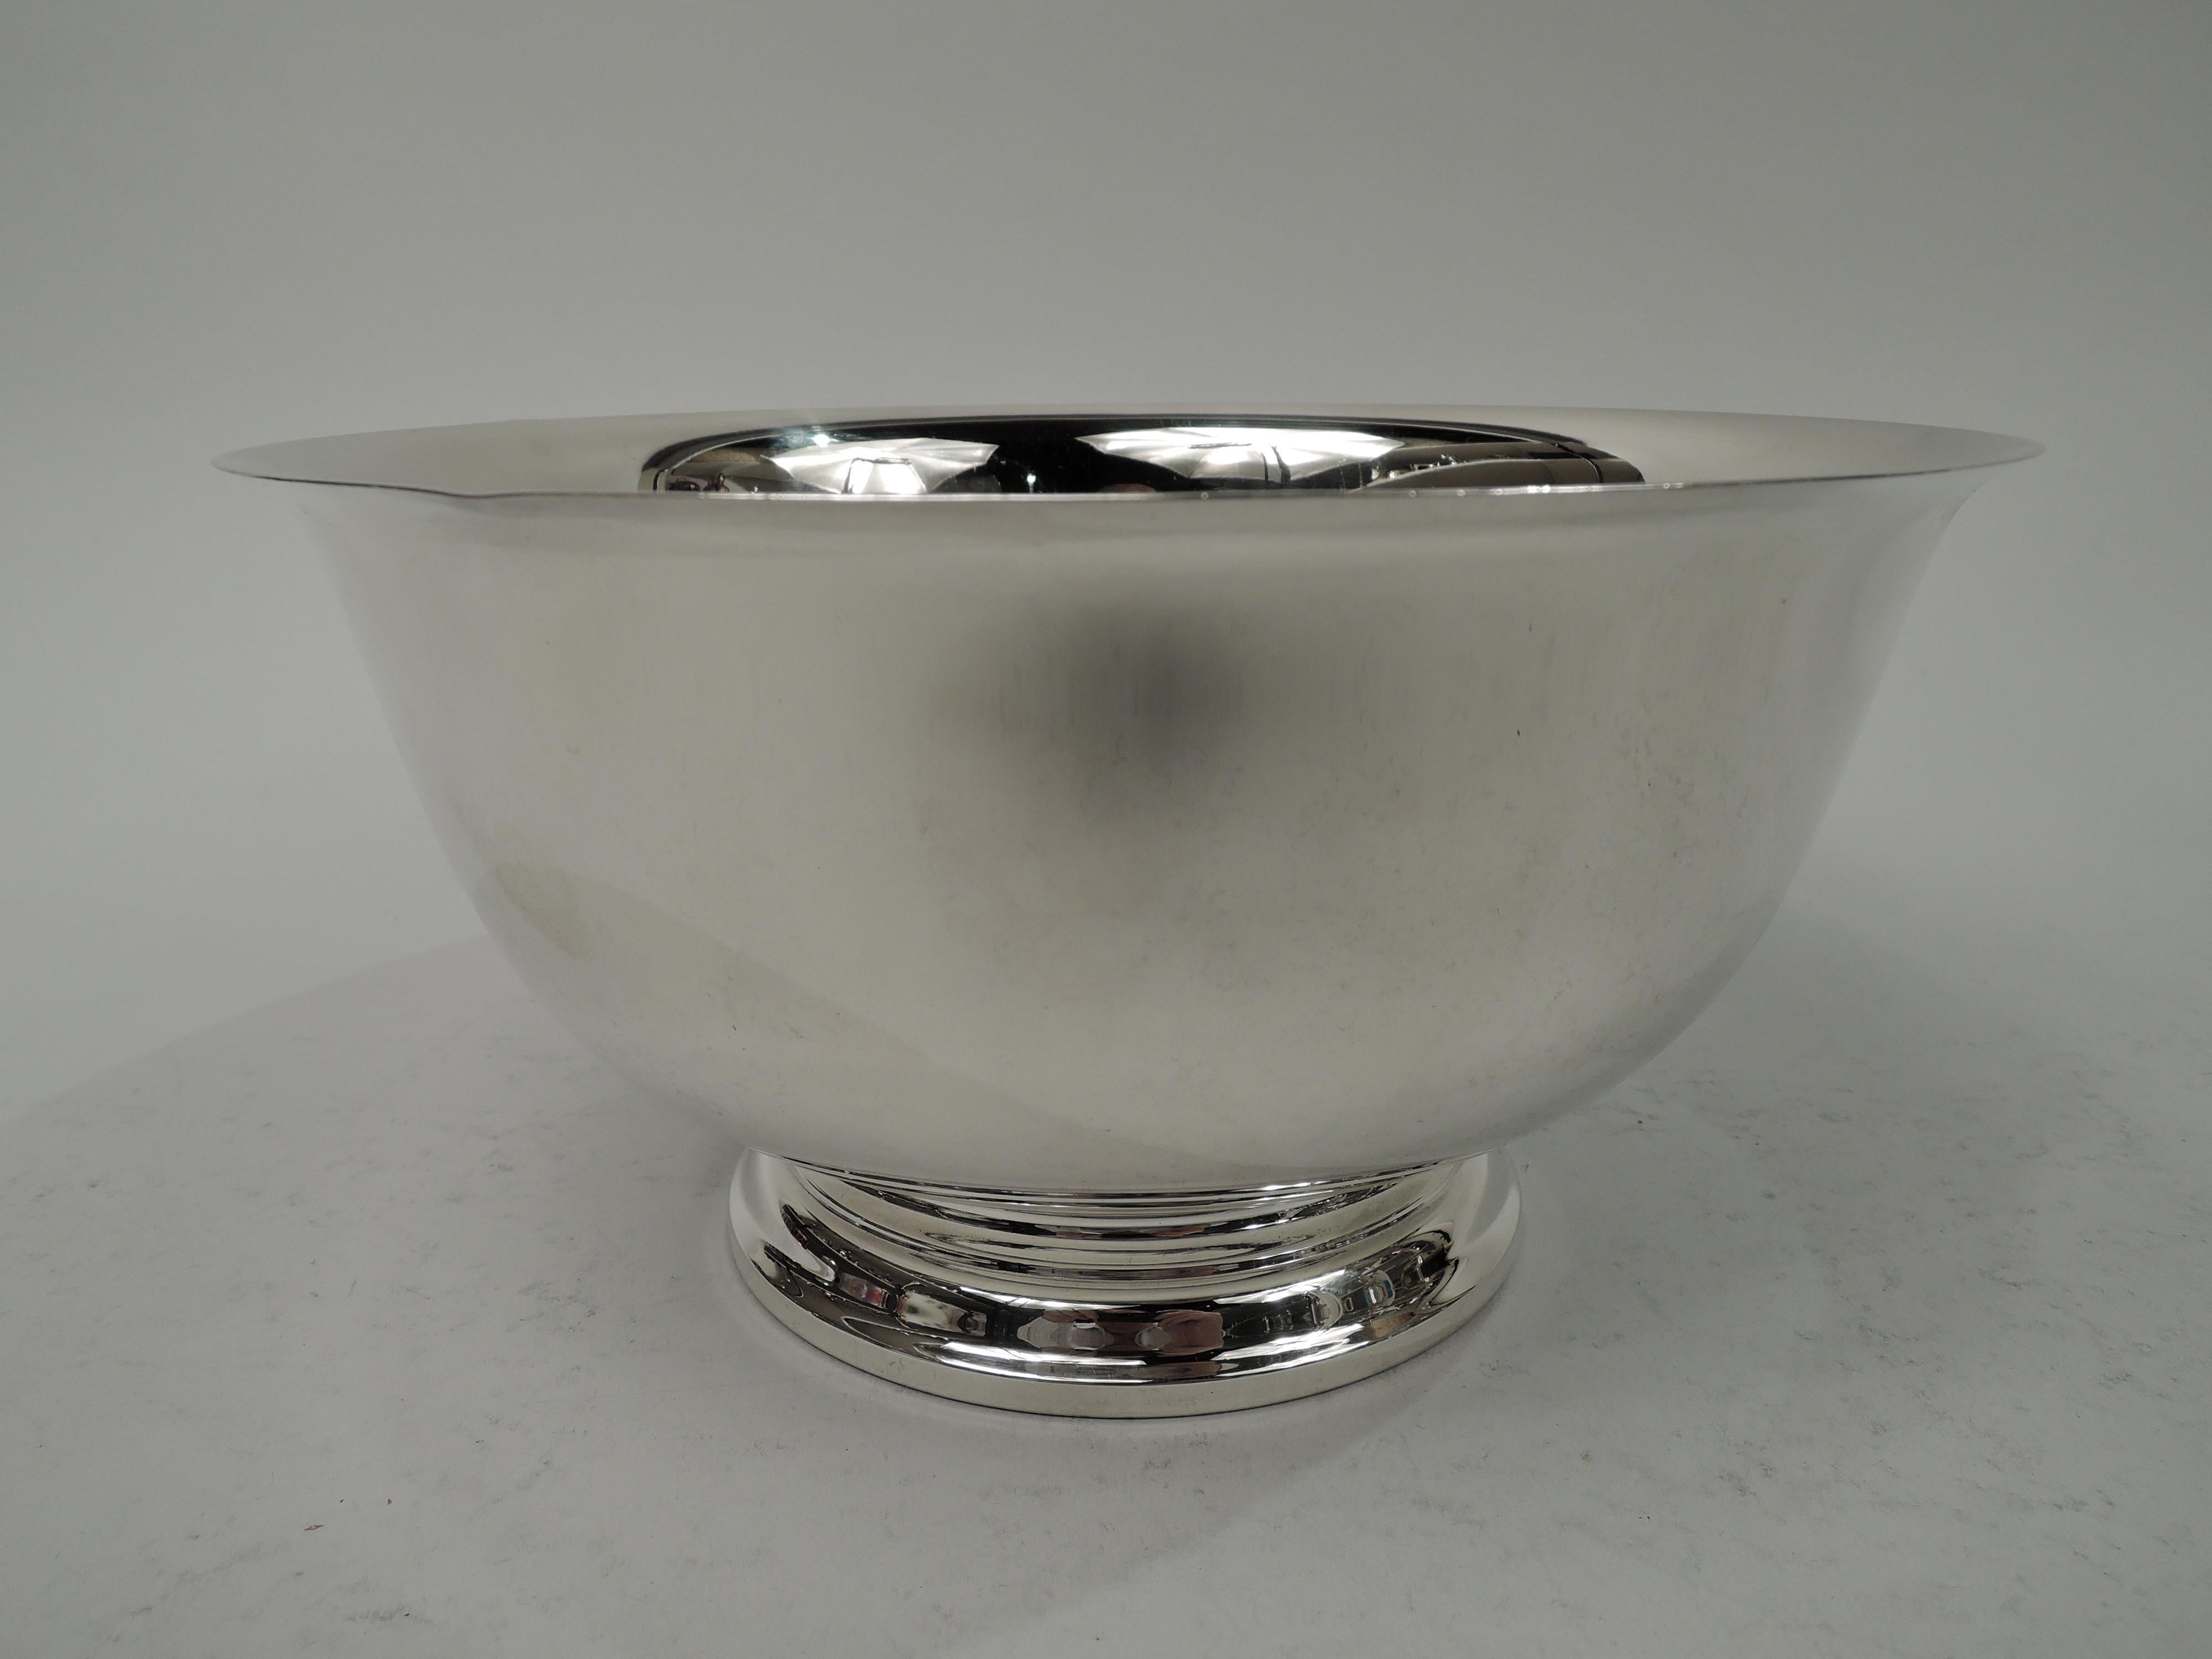 American Colonial sterling silver bowl. Made by Gorham in Providence in 1948. Curved and tapering sides, flared rim, and stepped foot. For serving or presentation with lots of room for engraving. Fully marked including maker’s stamp, date code, and